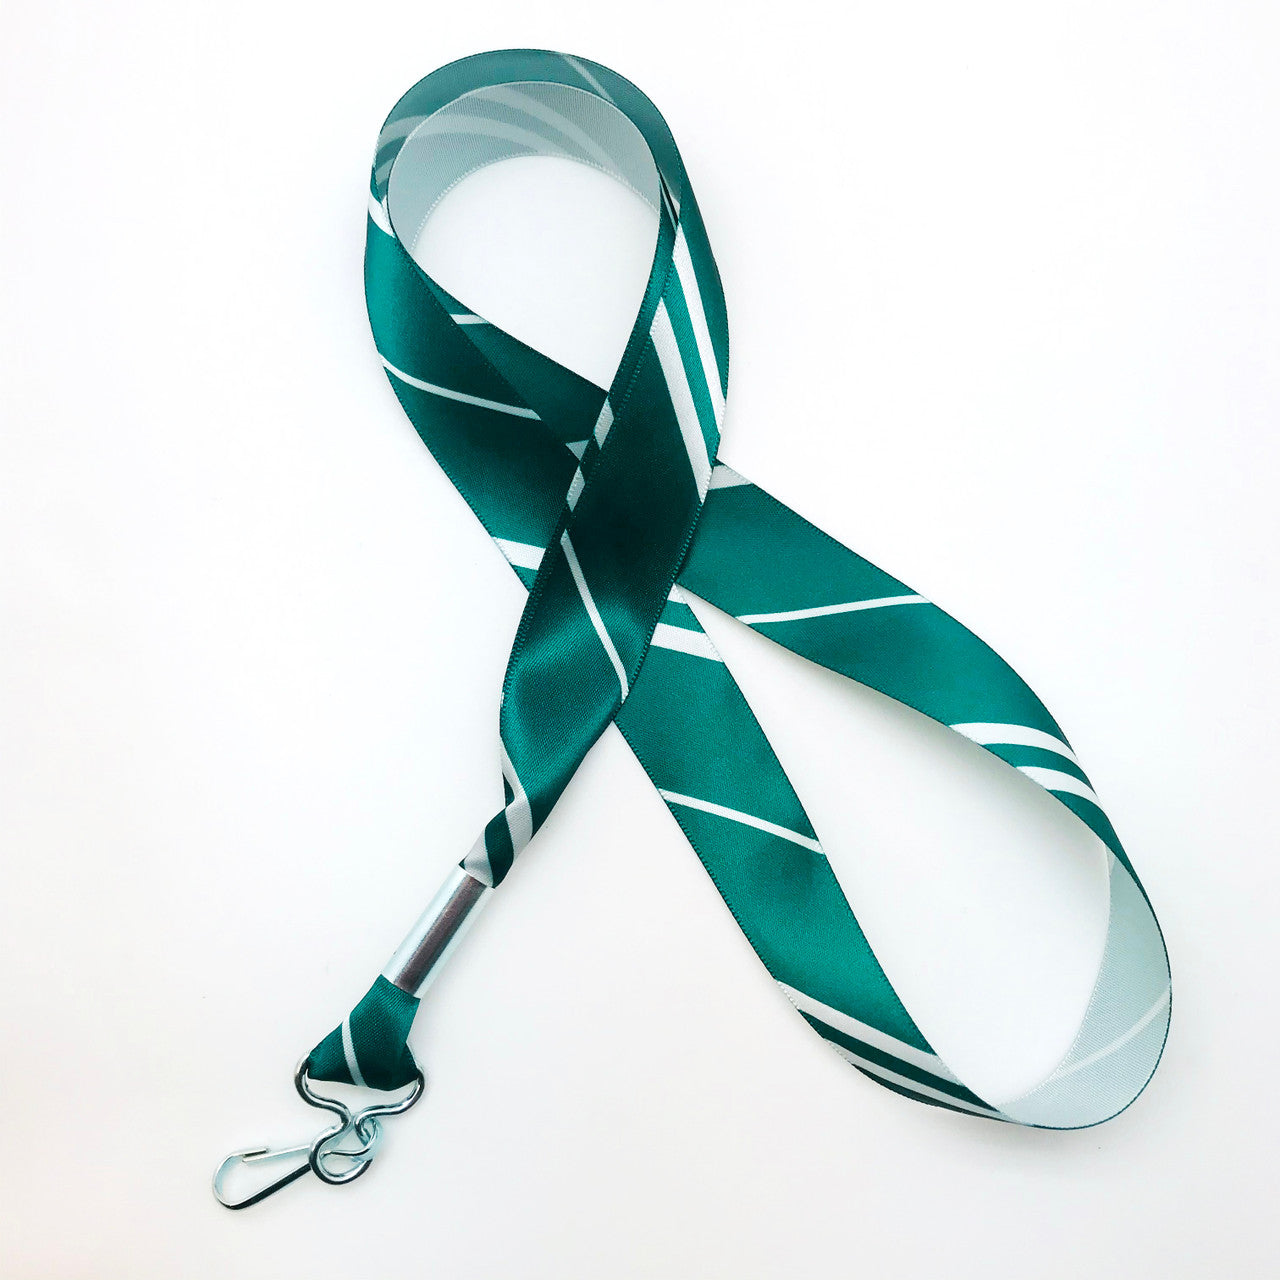 Ribbon lanyard in green and silver stripes printed on 7/8" silver single face satin ribbon is a fun gift idea for all the Wizard fans on  your gift list. Perfect for events, parties and weddings too! All our products are designed, printed and assembled in the USA